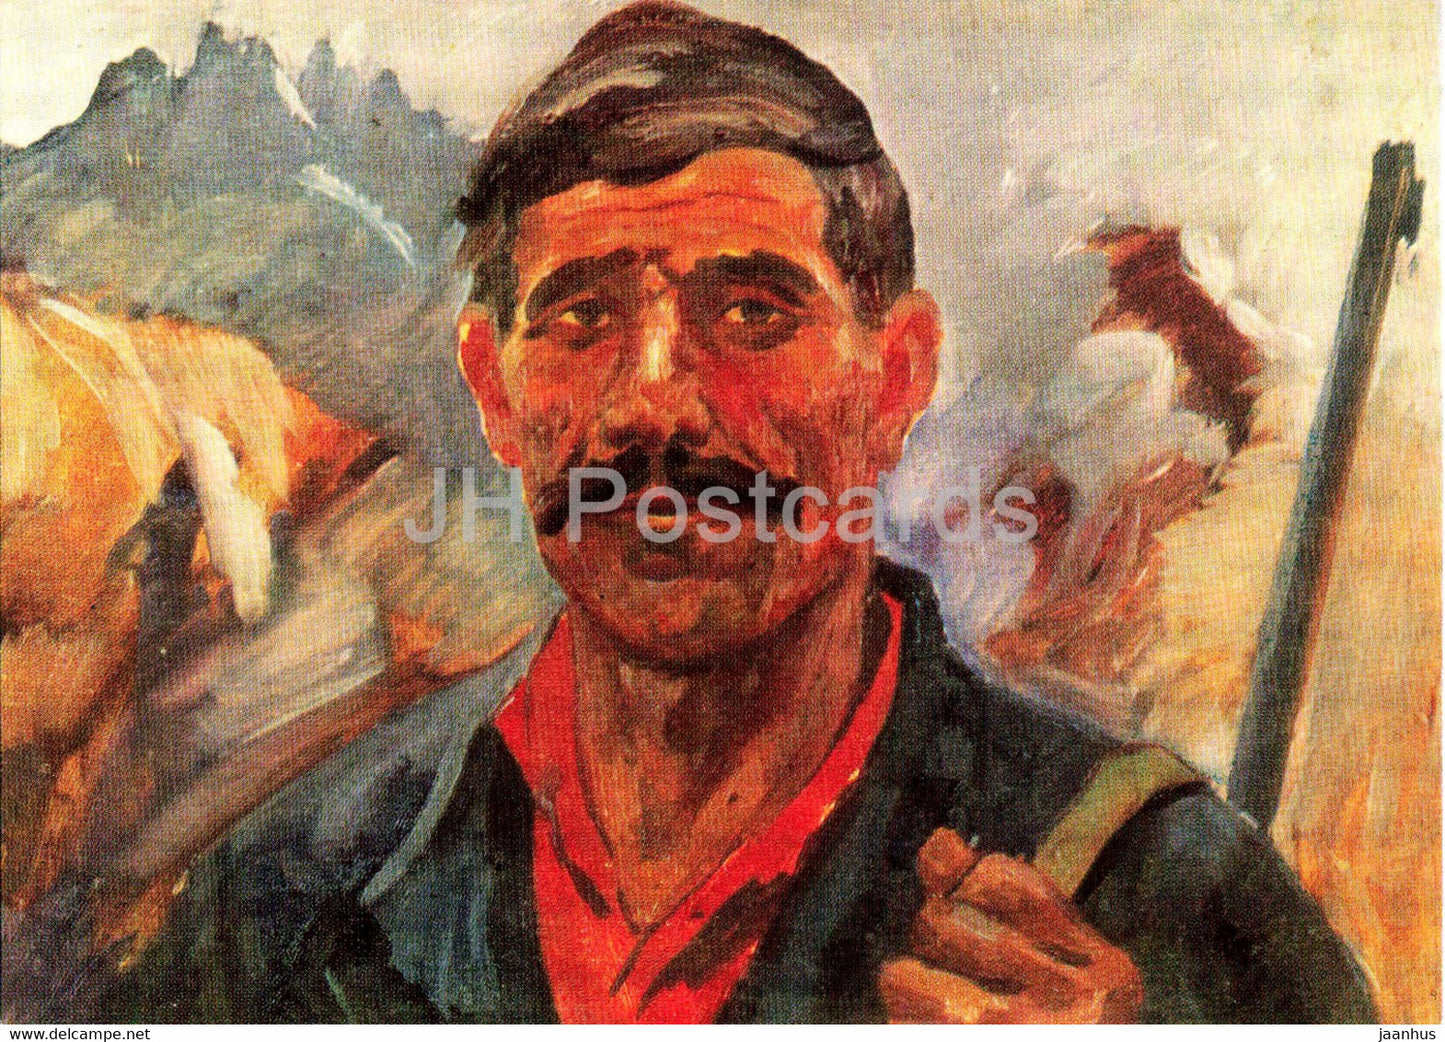 painting by V. Boborykin - Hunter from Ishkashim - Along the Pamir roads - Russian art - 1974 - Russia USSR - unused - JH Postcards